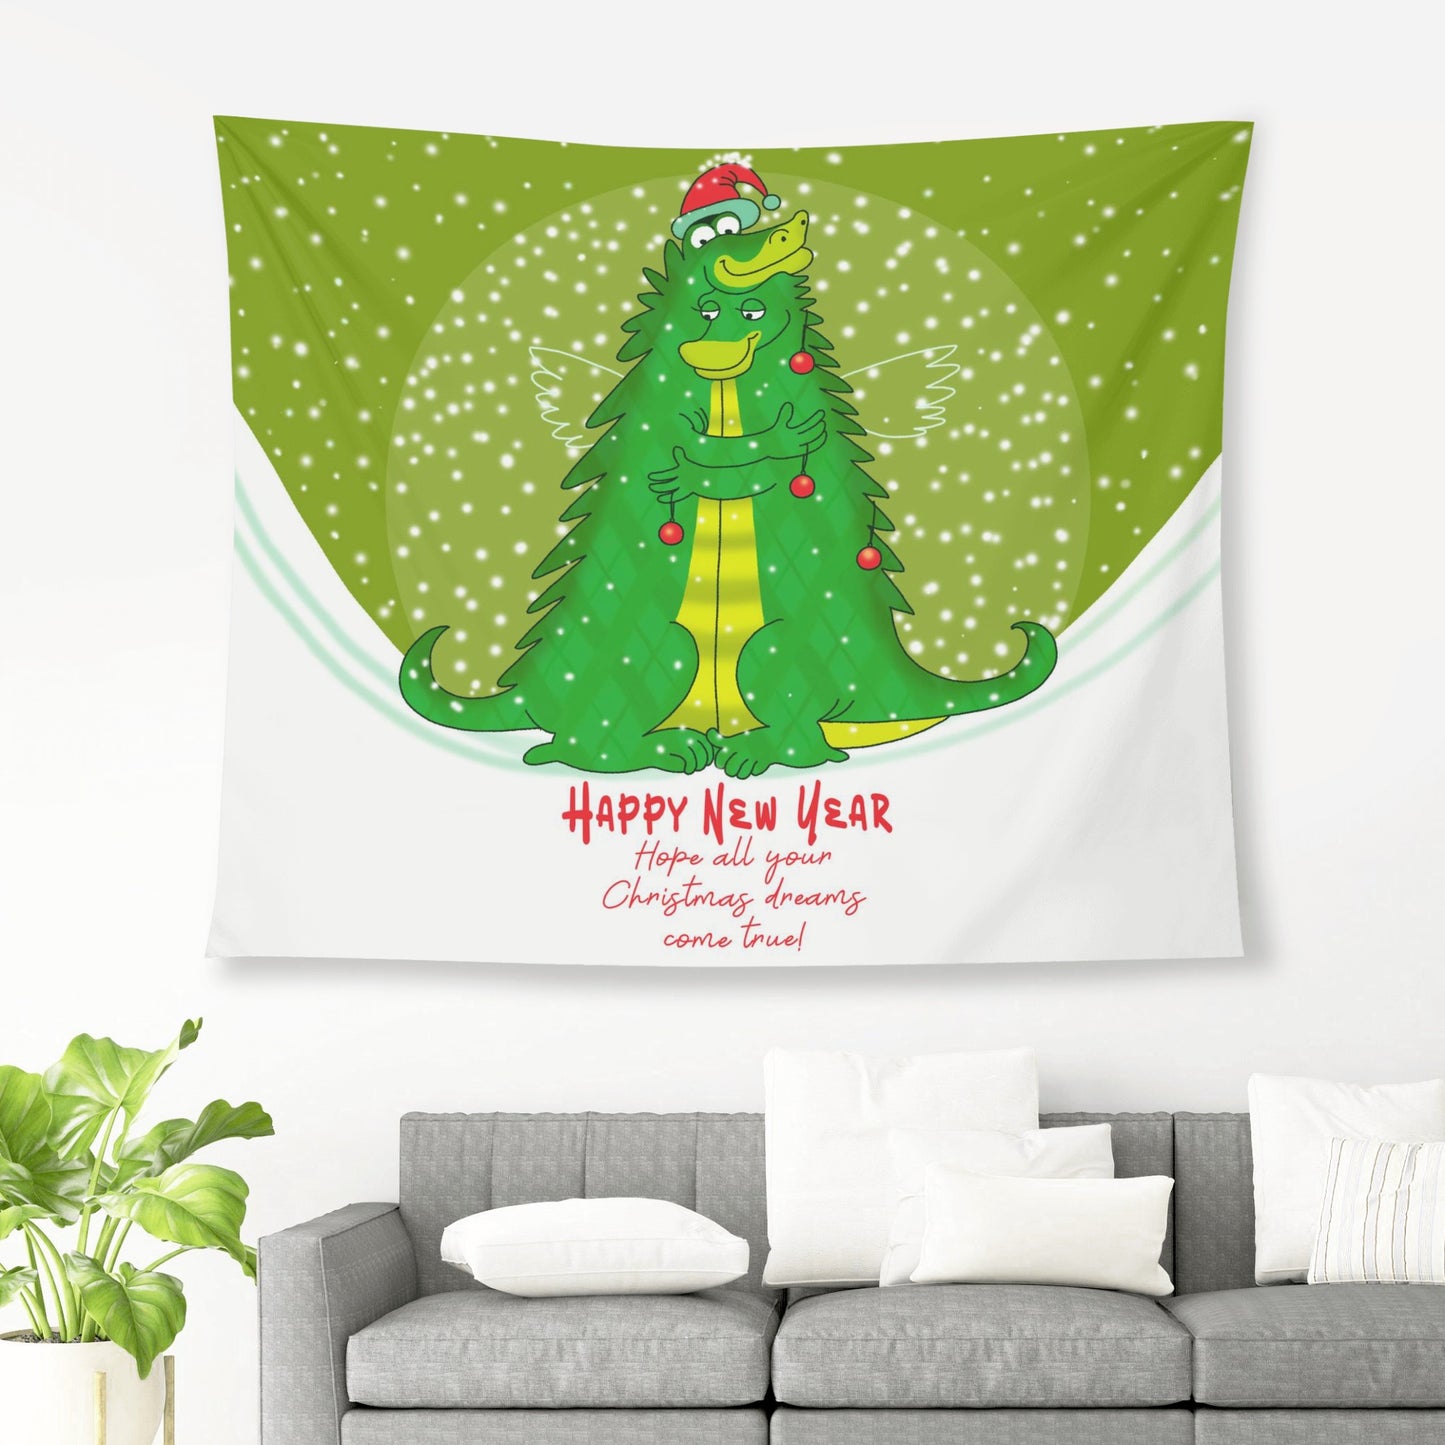 Have a Dinomite  Christmas With This Polyester Peach Skin Wall Tapestry 6 Sizes